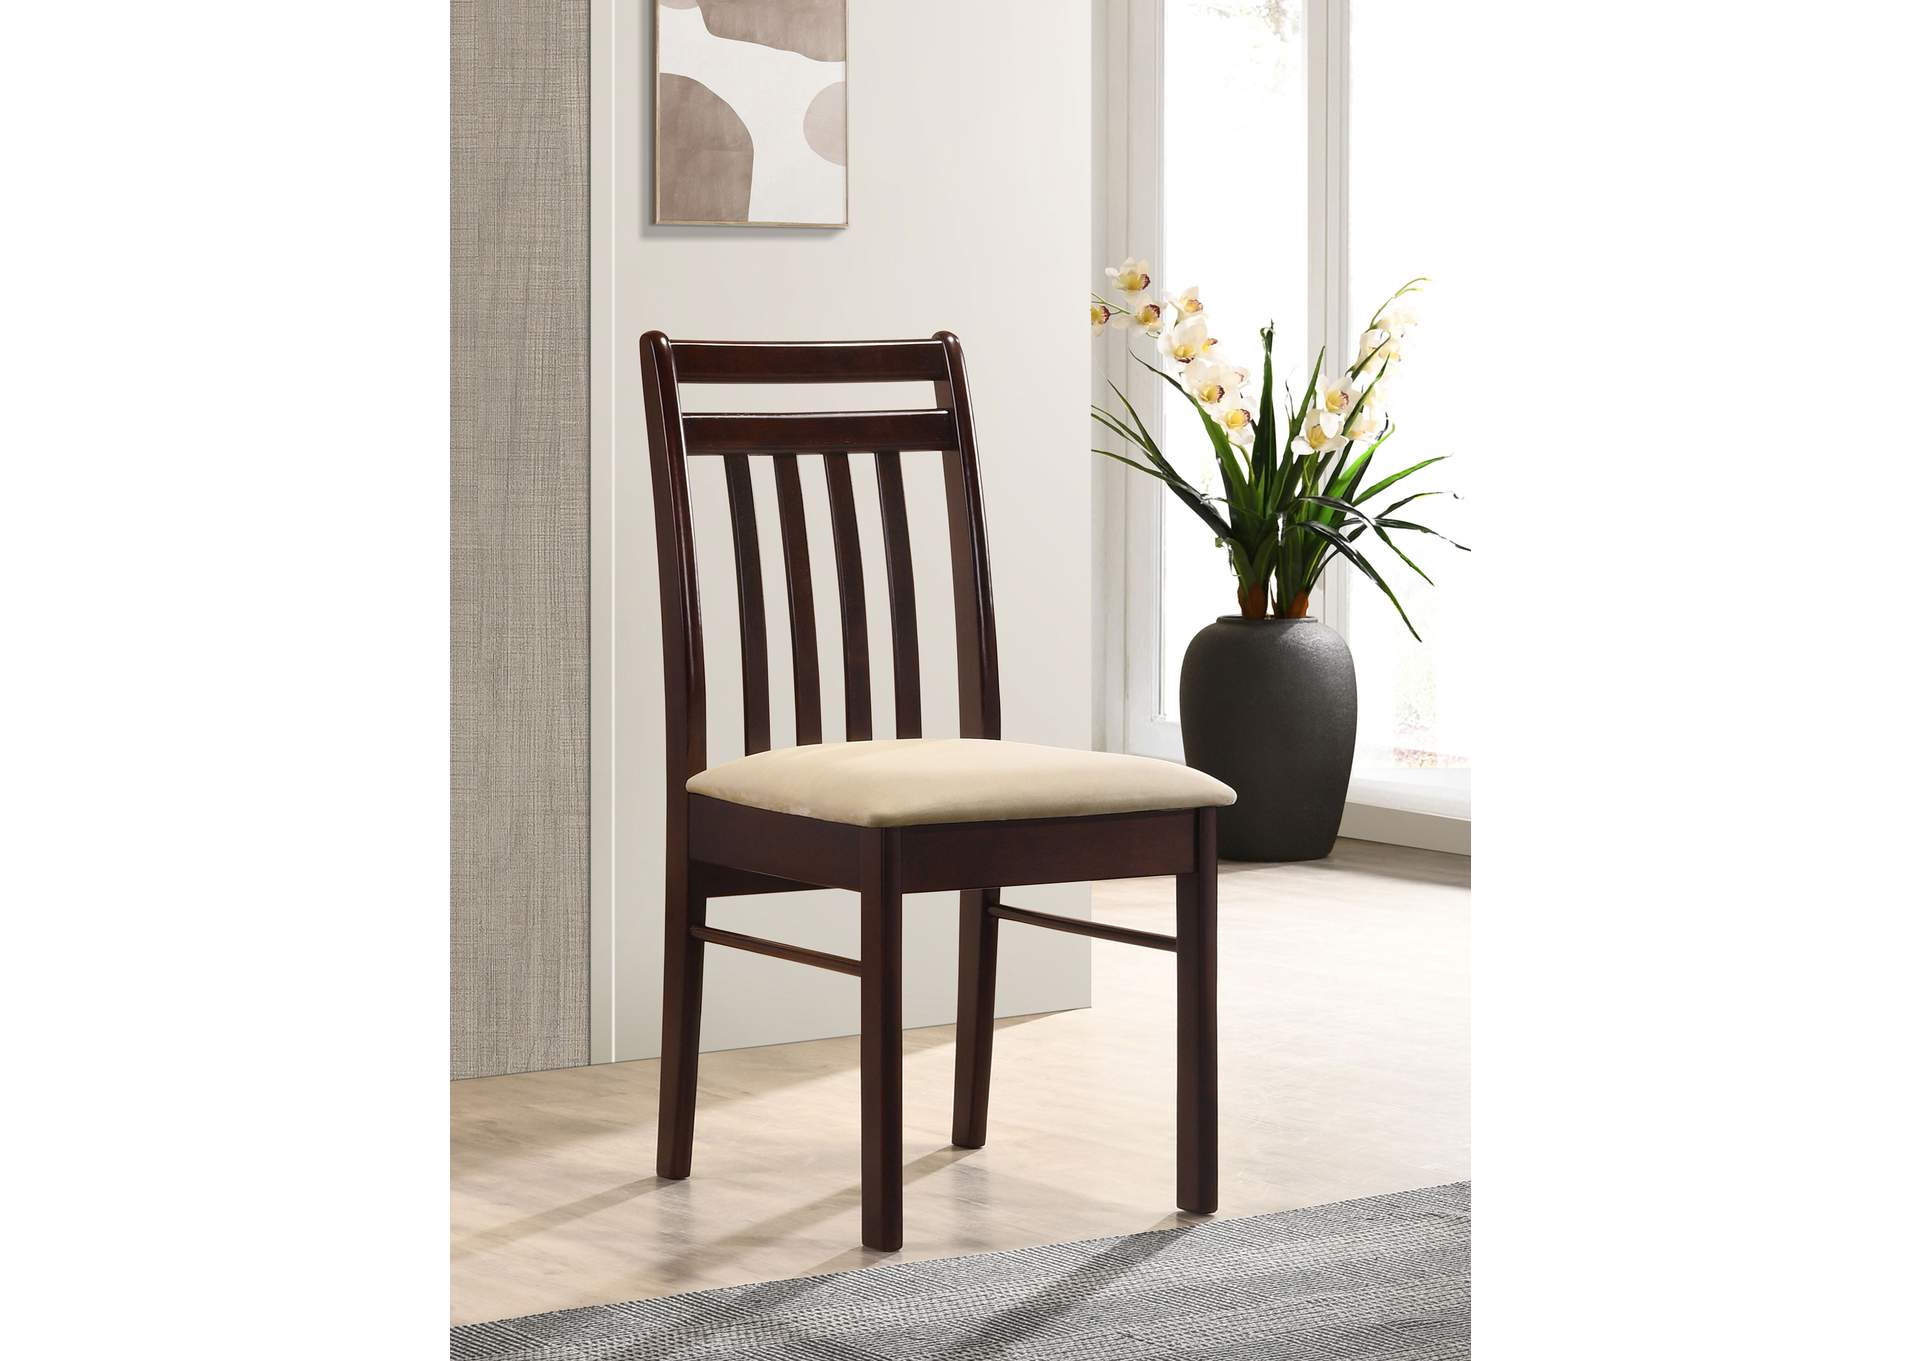 Phoenix Slat Back Chair Light Brown and Cappuccino